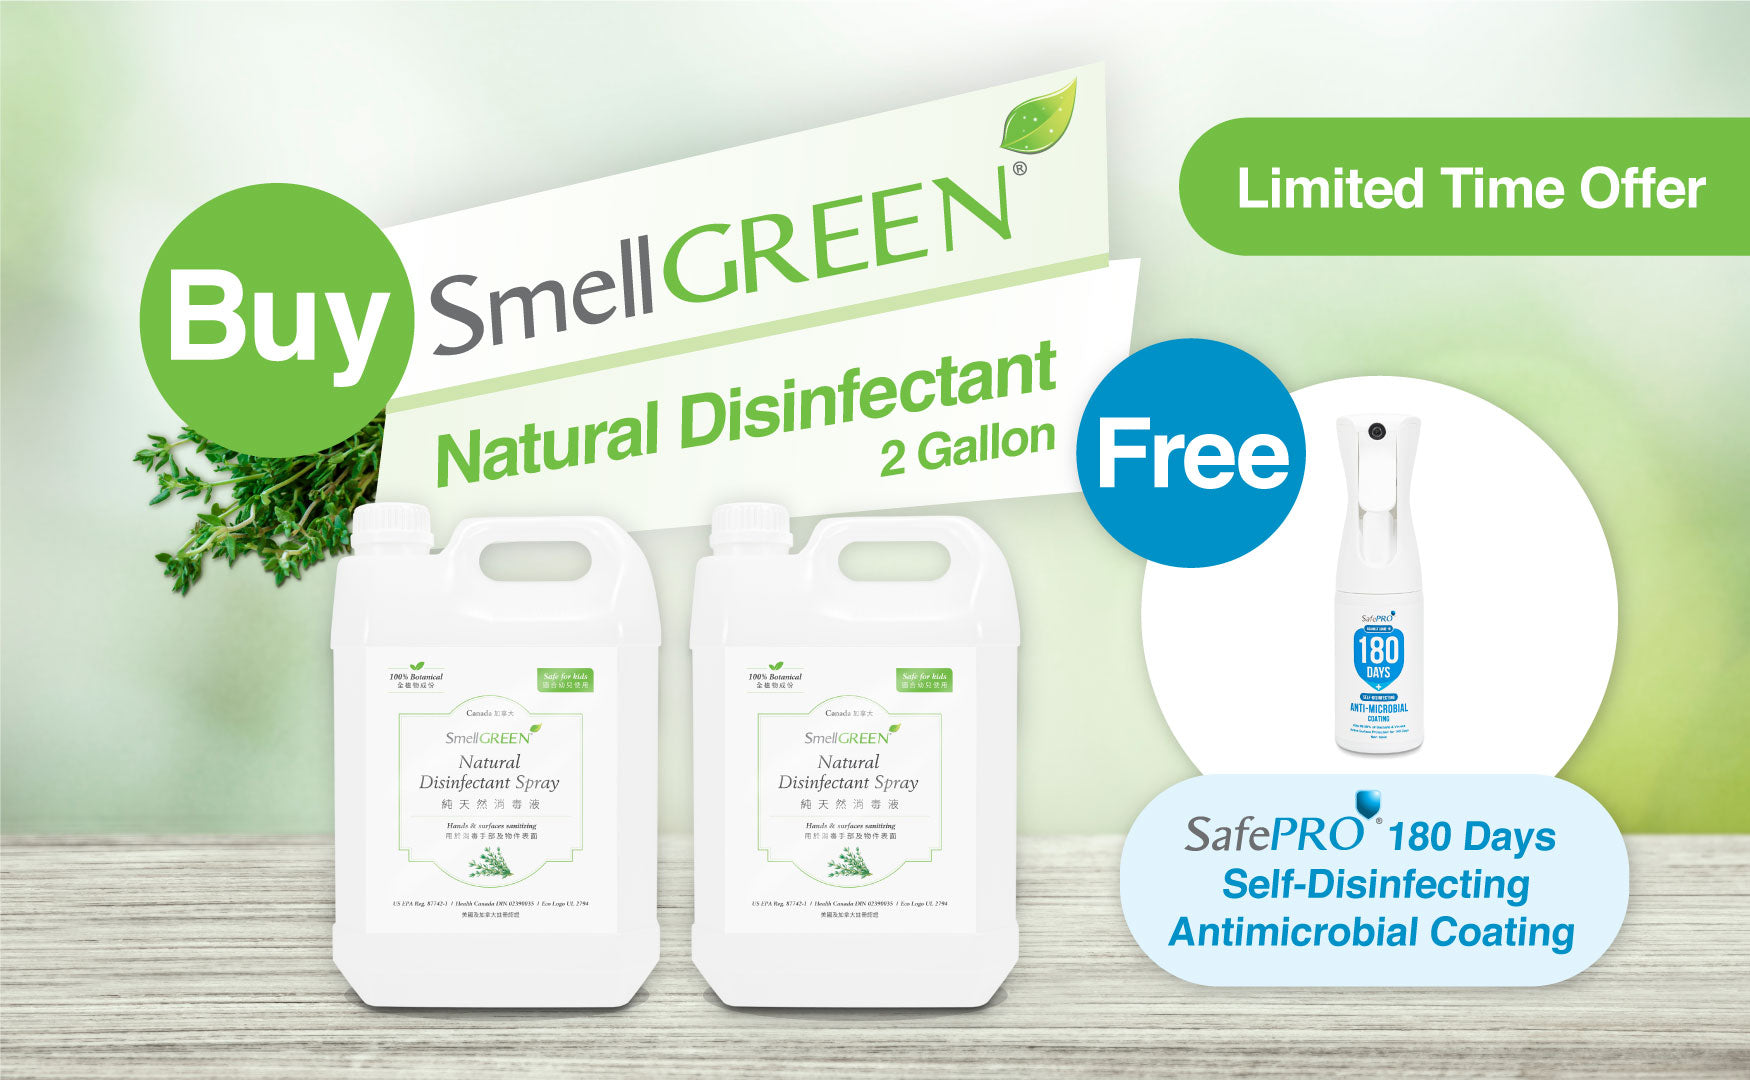 【Limited Time Offer】Buy SmellGREEN® to Have A 180 Days Protection For FREE!